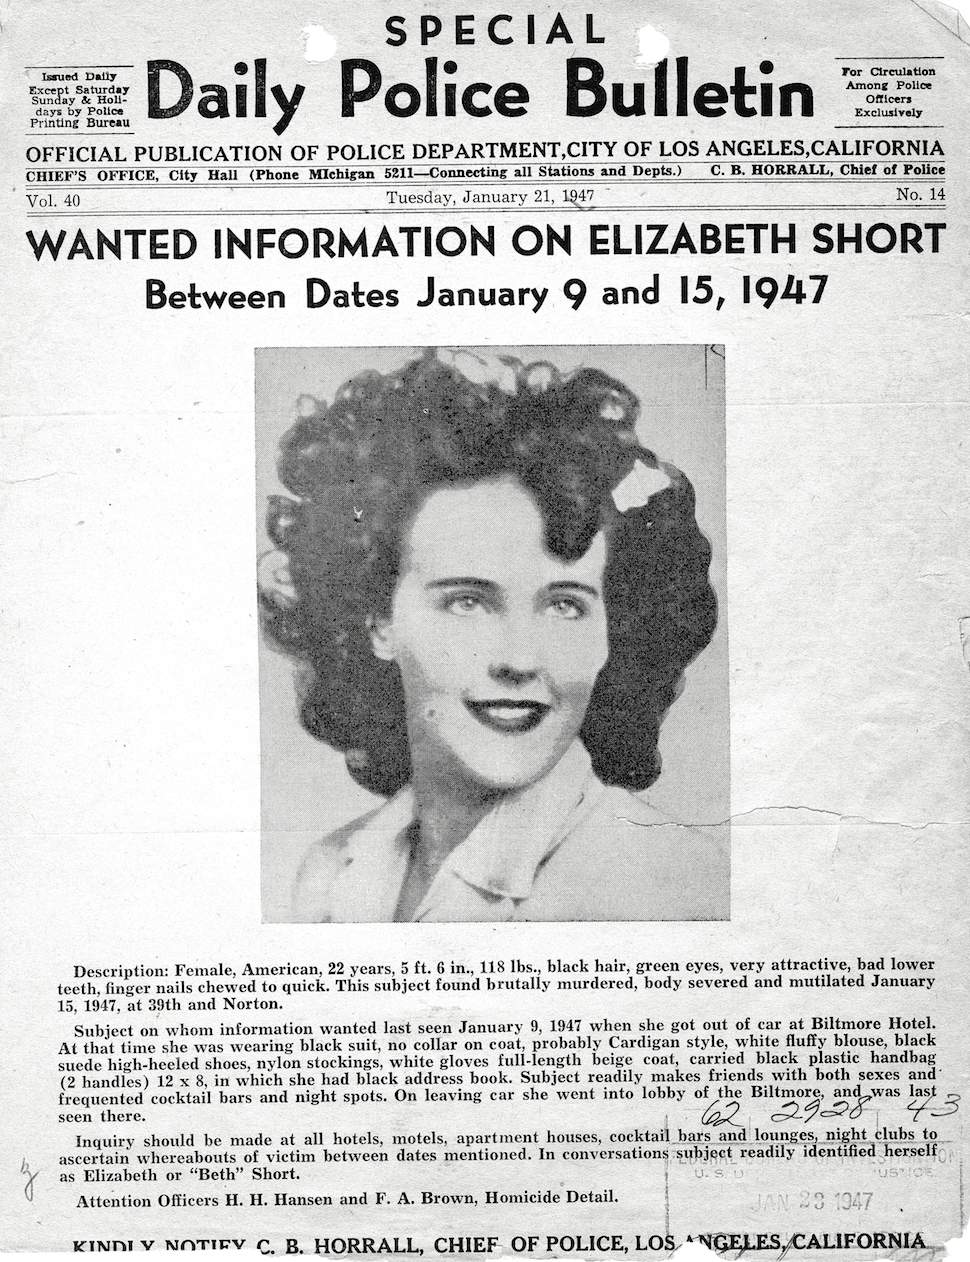 Los Angeles Police Department wanted flyer on Elizabeth Short, aka the "Black Dahlia," who was brutally murdered in January 1947. The FBI supported the Los Angeles Police Department in the case, including by identifying Short through her fingerprints that were on file with the Bureau.